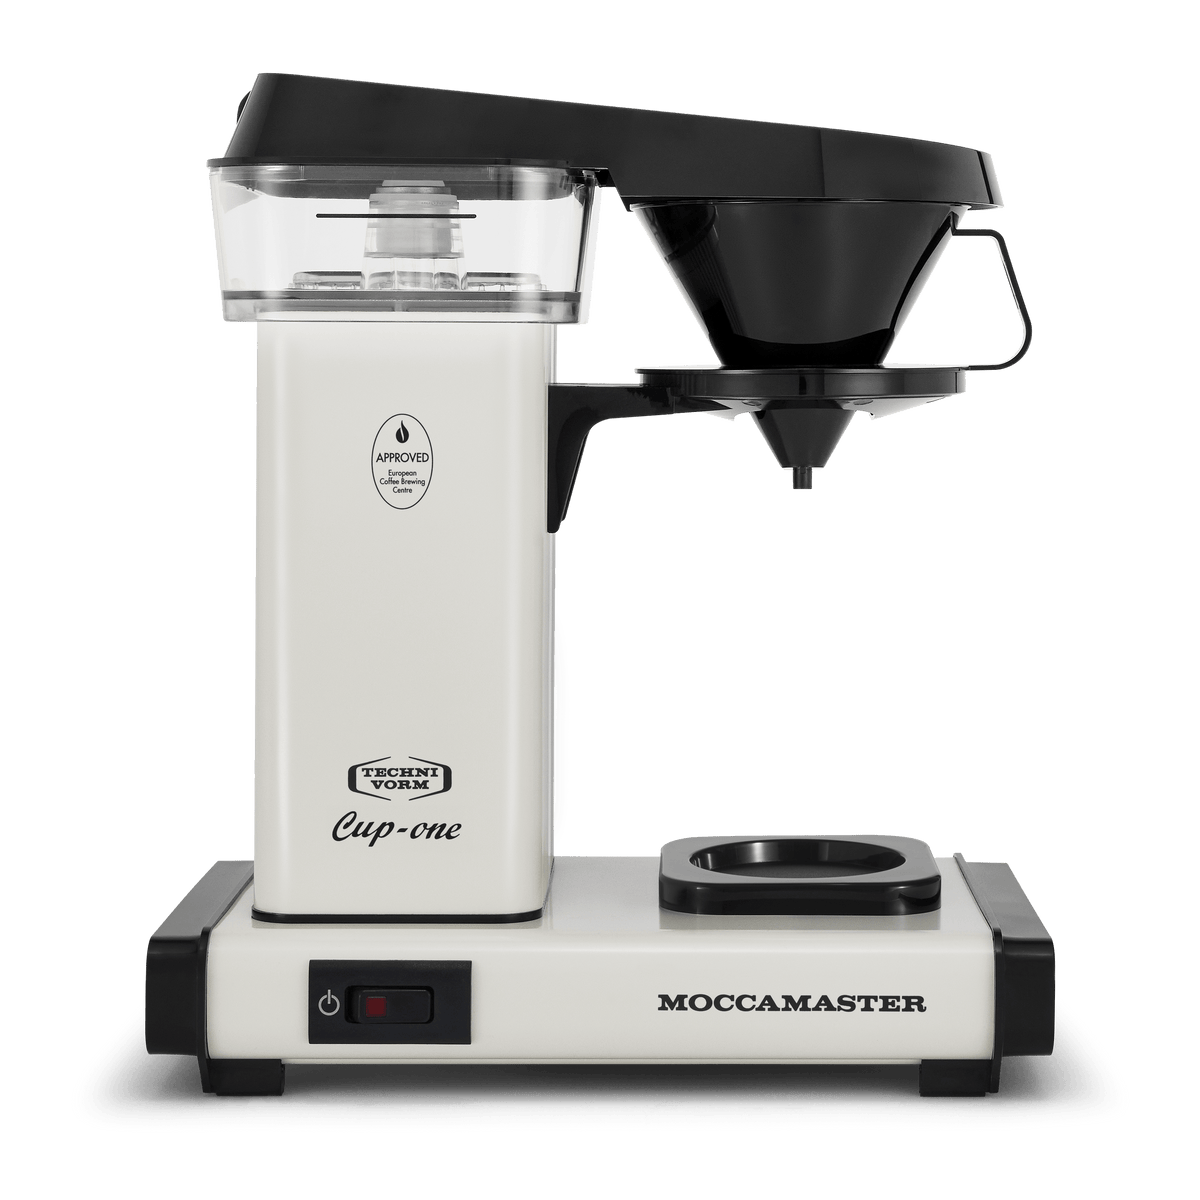 Moccamaster Cup-one Front - off-white single cup coffee brewer, with rectangular body and base, clear acrylic water reservoir, a black removable cup holder, and auto-off power switch